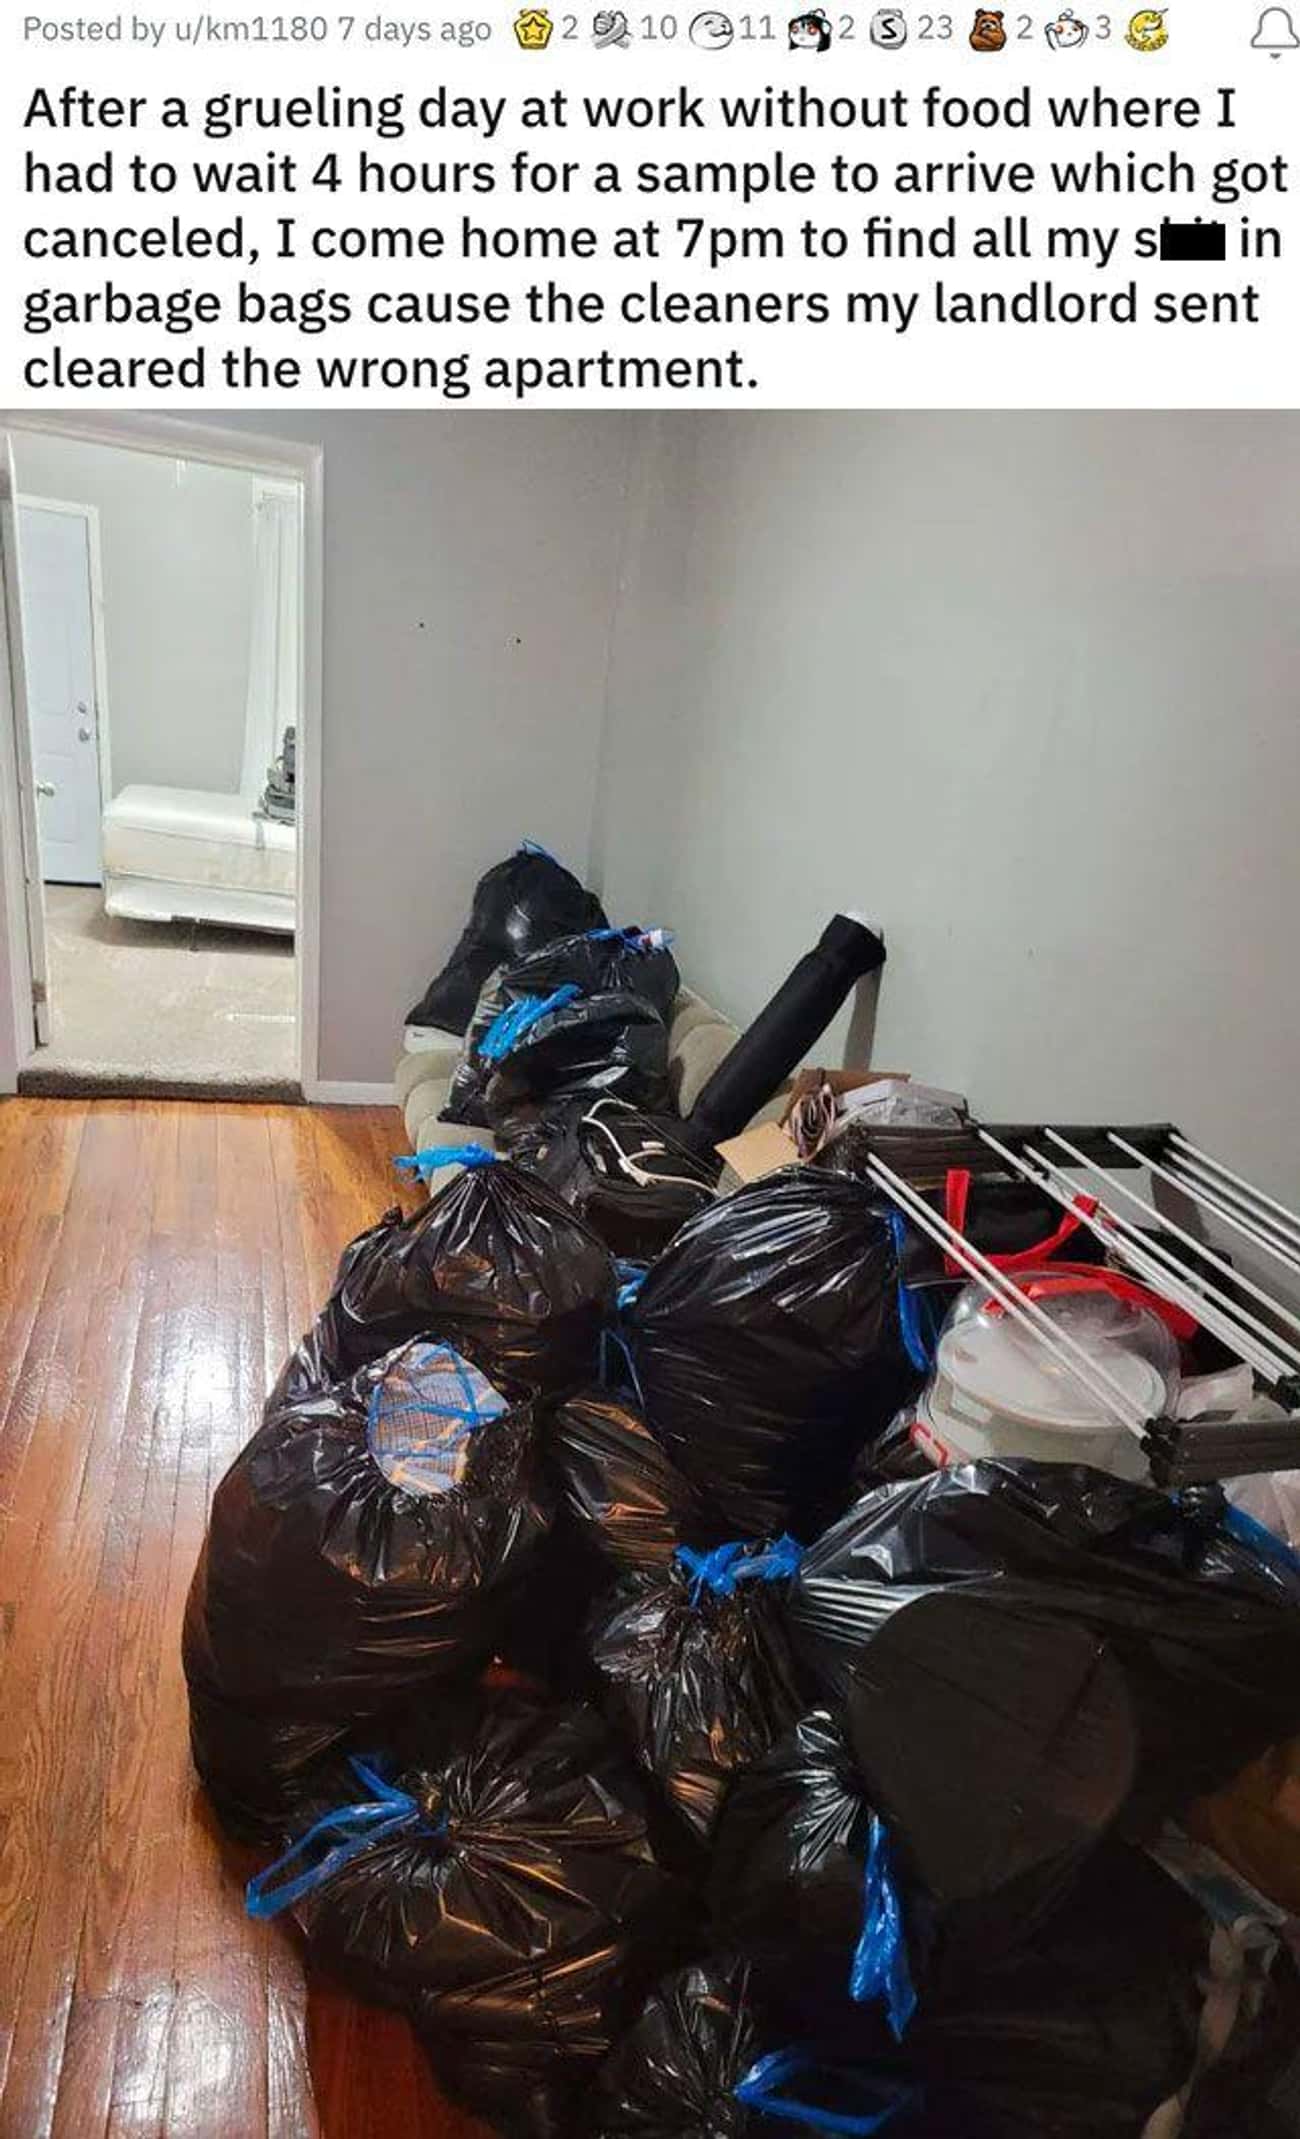 The Landlord Cleared Out The Wrong Apartment